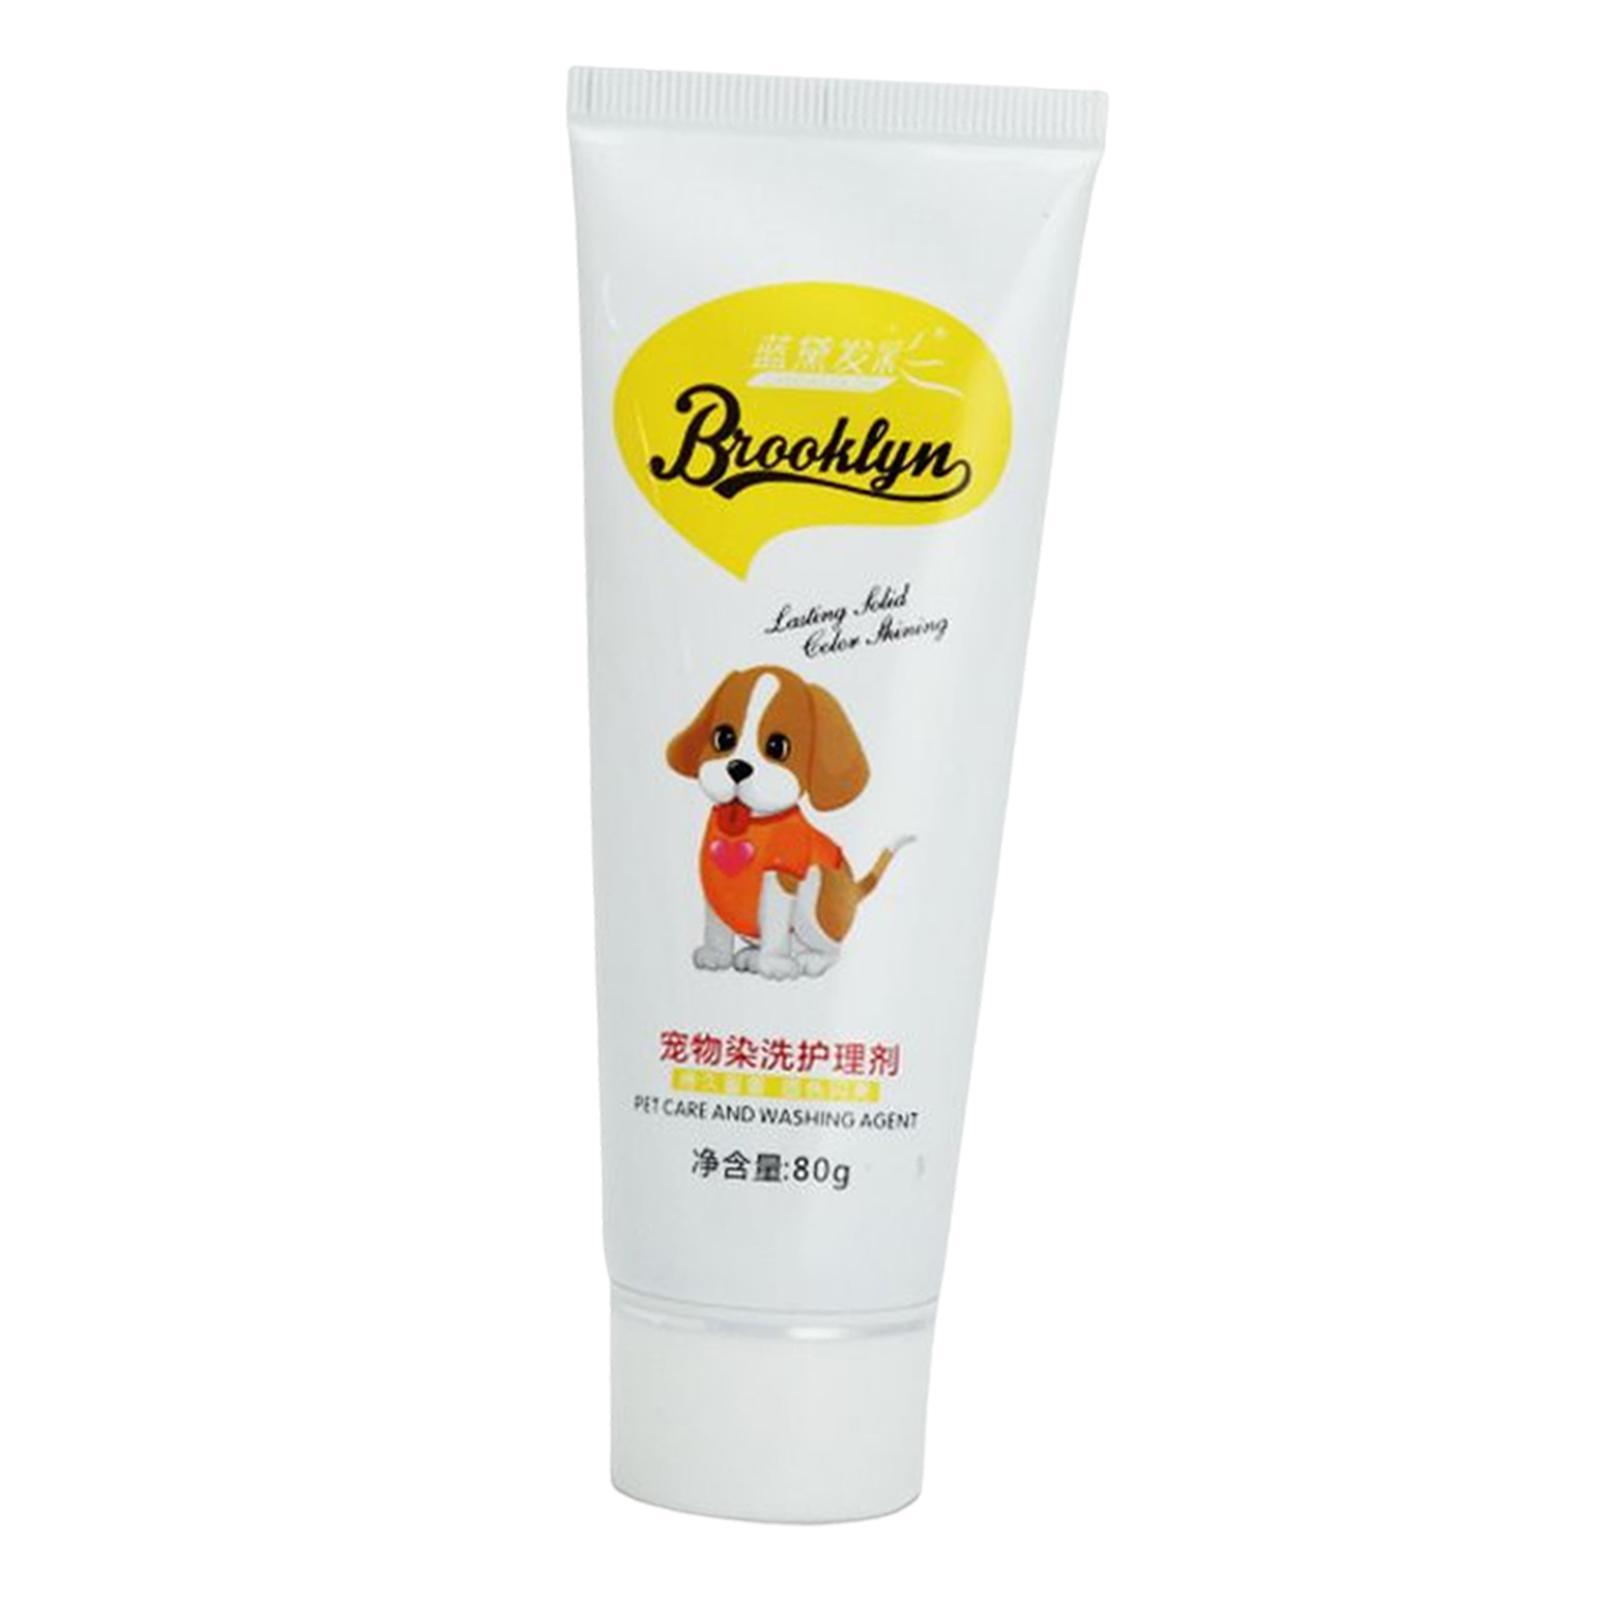 Dog Hair Dye Pet Care Safely Professional Bright Color for Dogs Cat Supplies